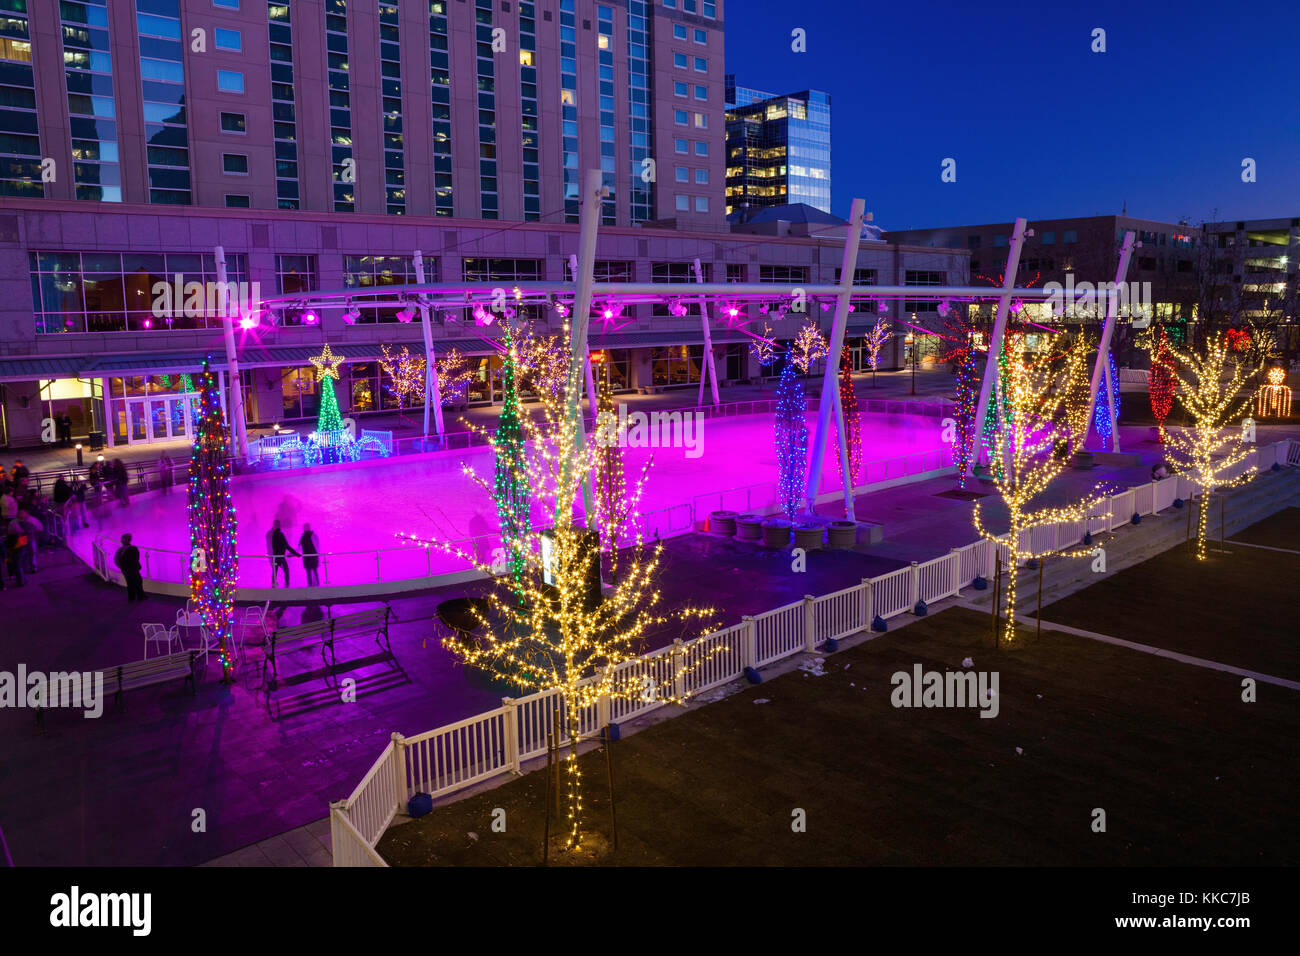 Gallivan center salt lake hires stock photography and images Alamy